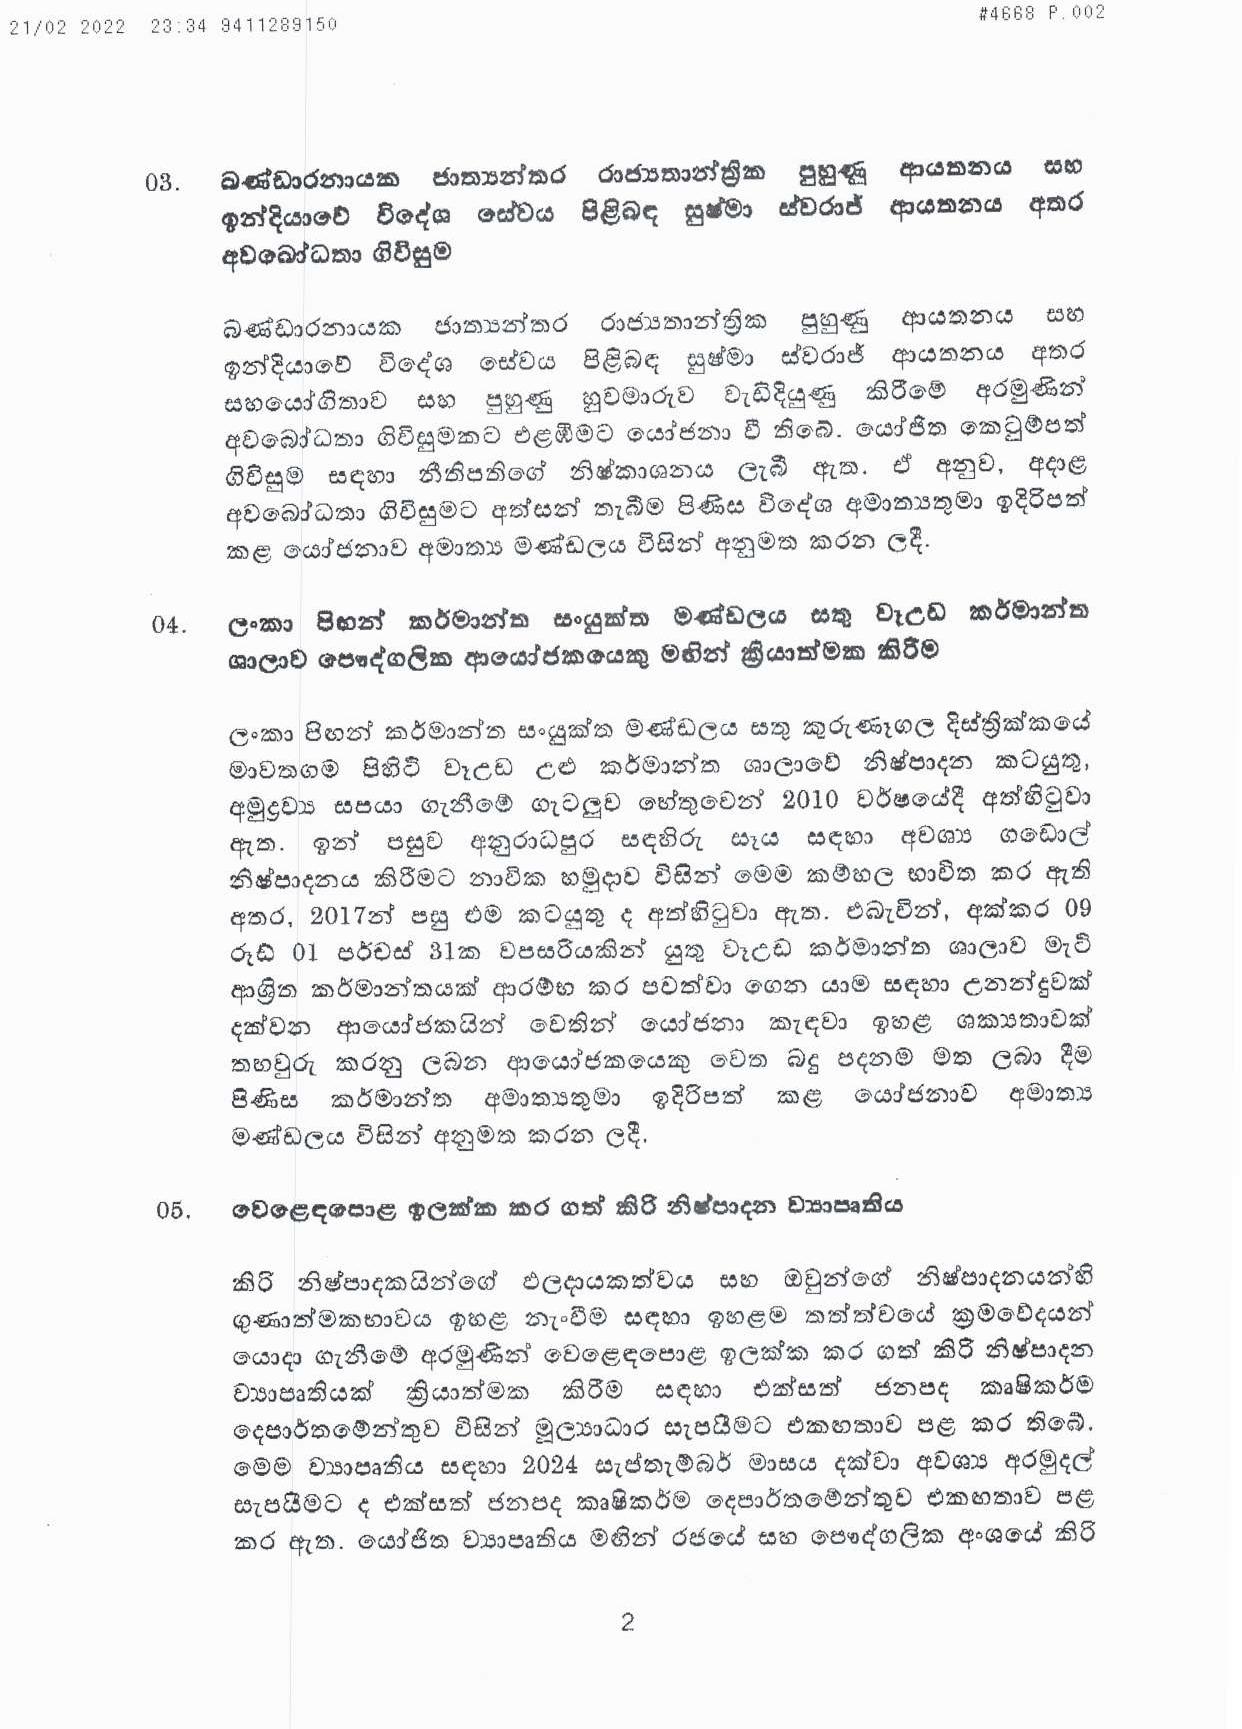 Cabinet Decision on 21.02.2022 page 002